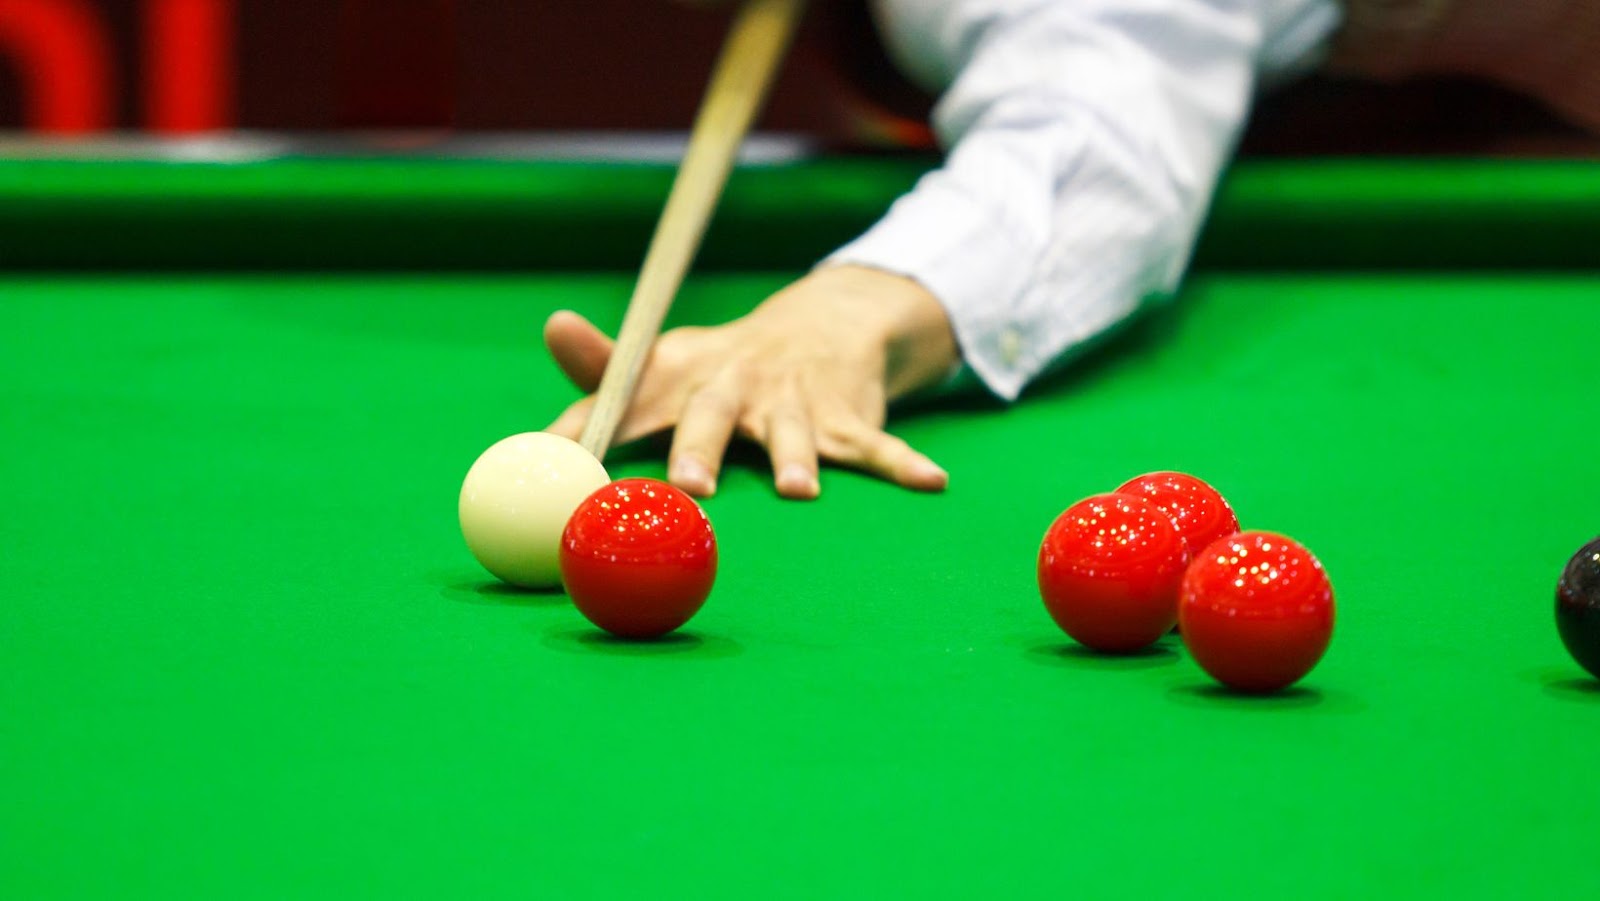 The Pros And Cons of Pool And Snooker